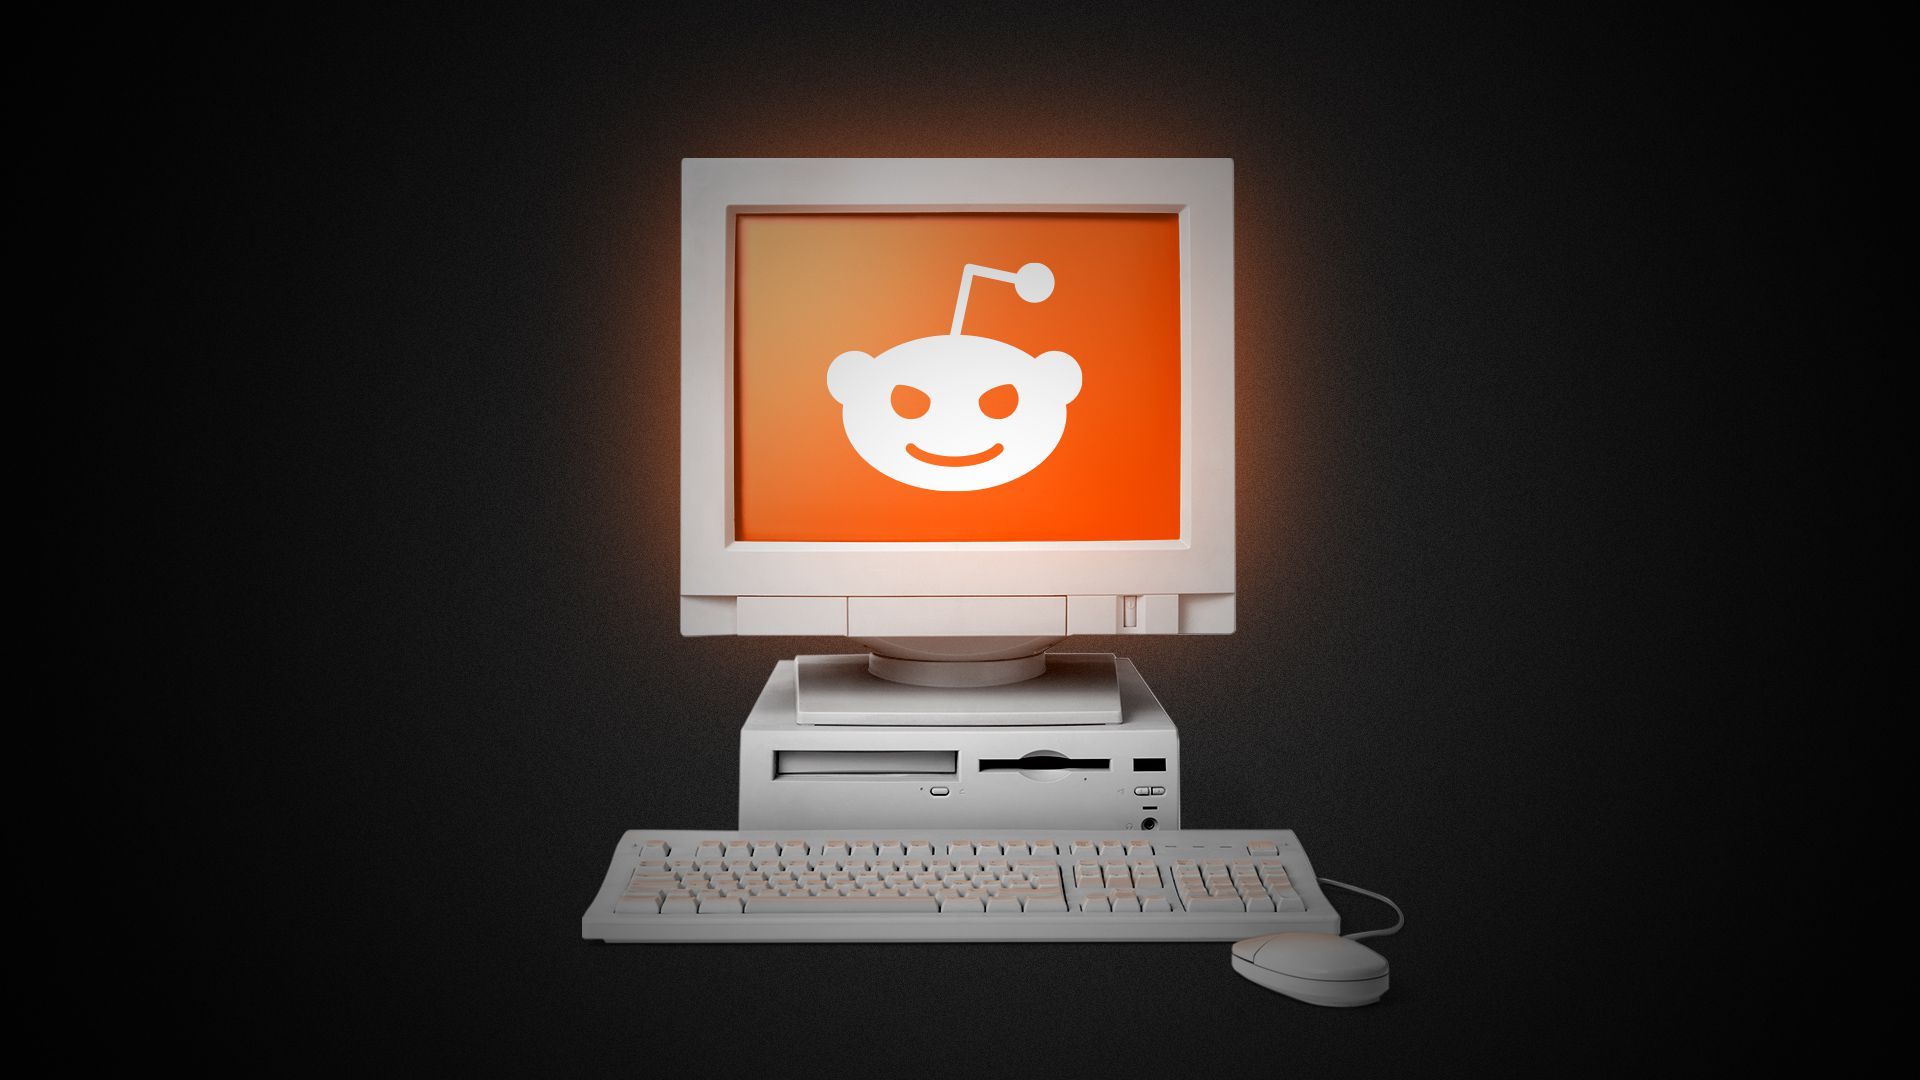 Illustration of a glowing computer in the dark with the Reddit Alien on screen looking menacing